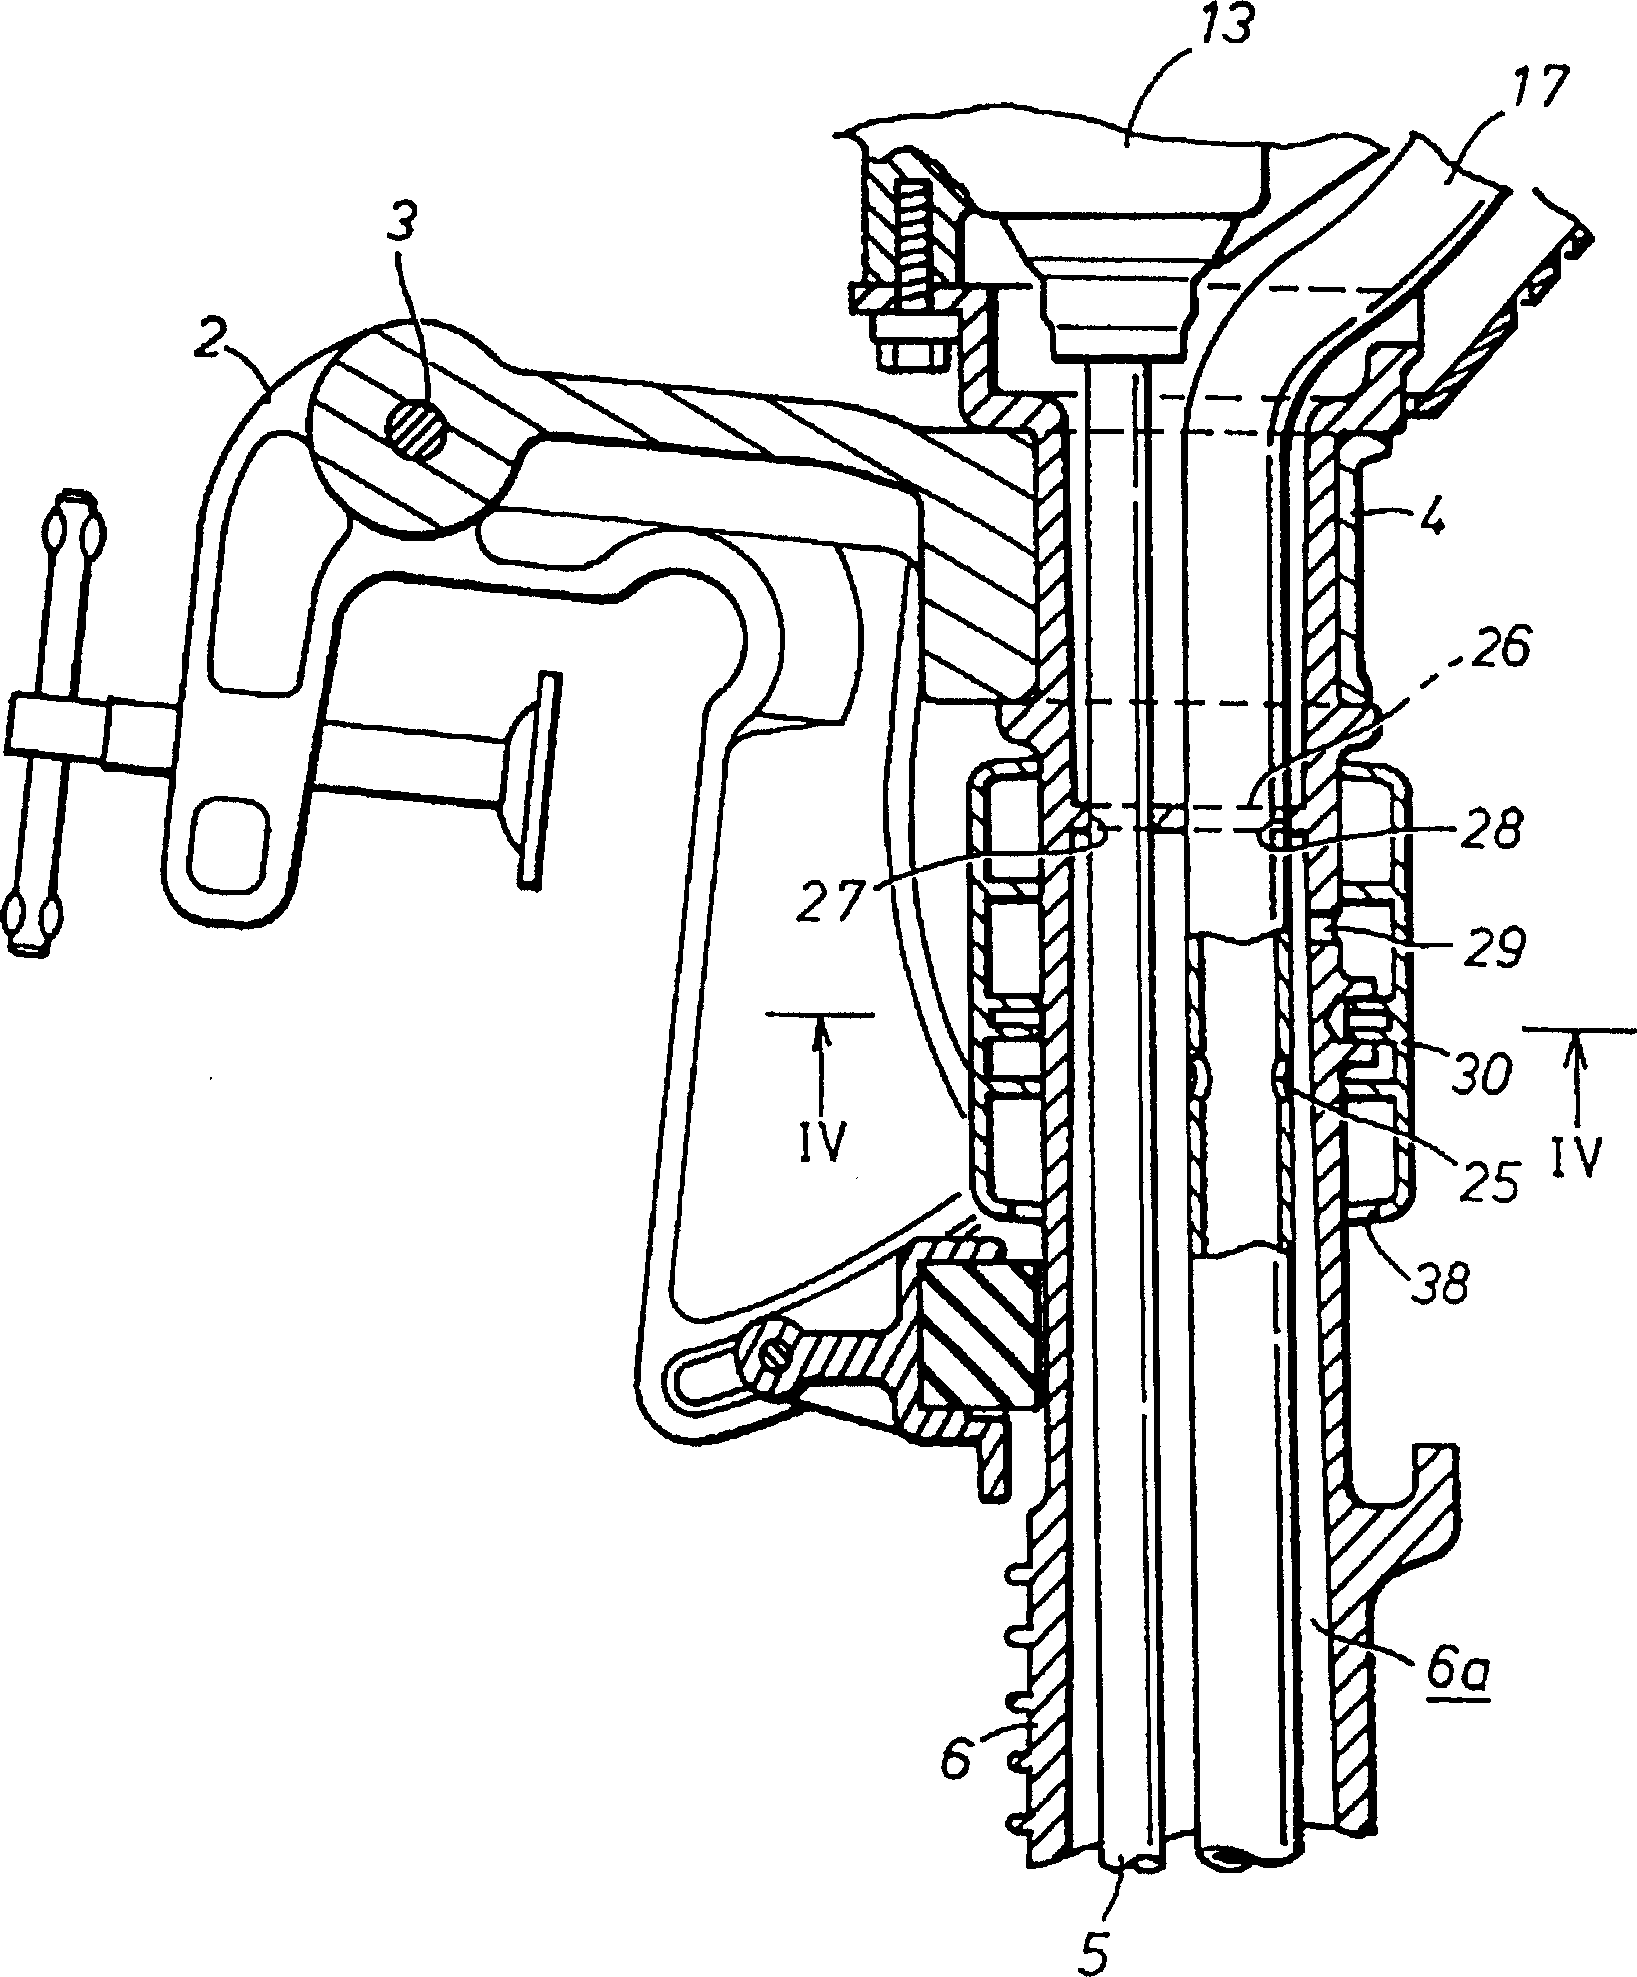 Exhaust arrangement for outboard marine drive engine